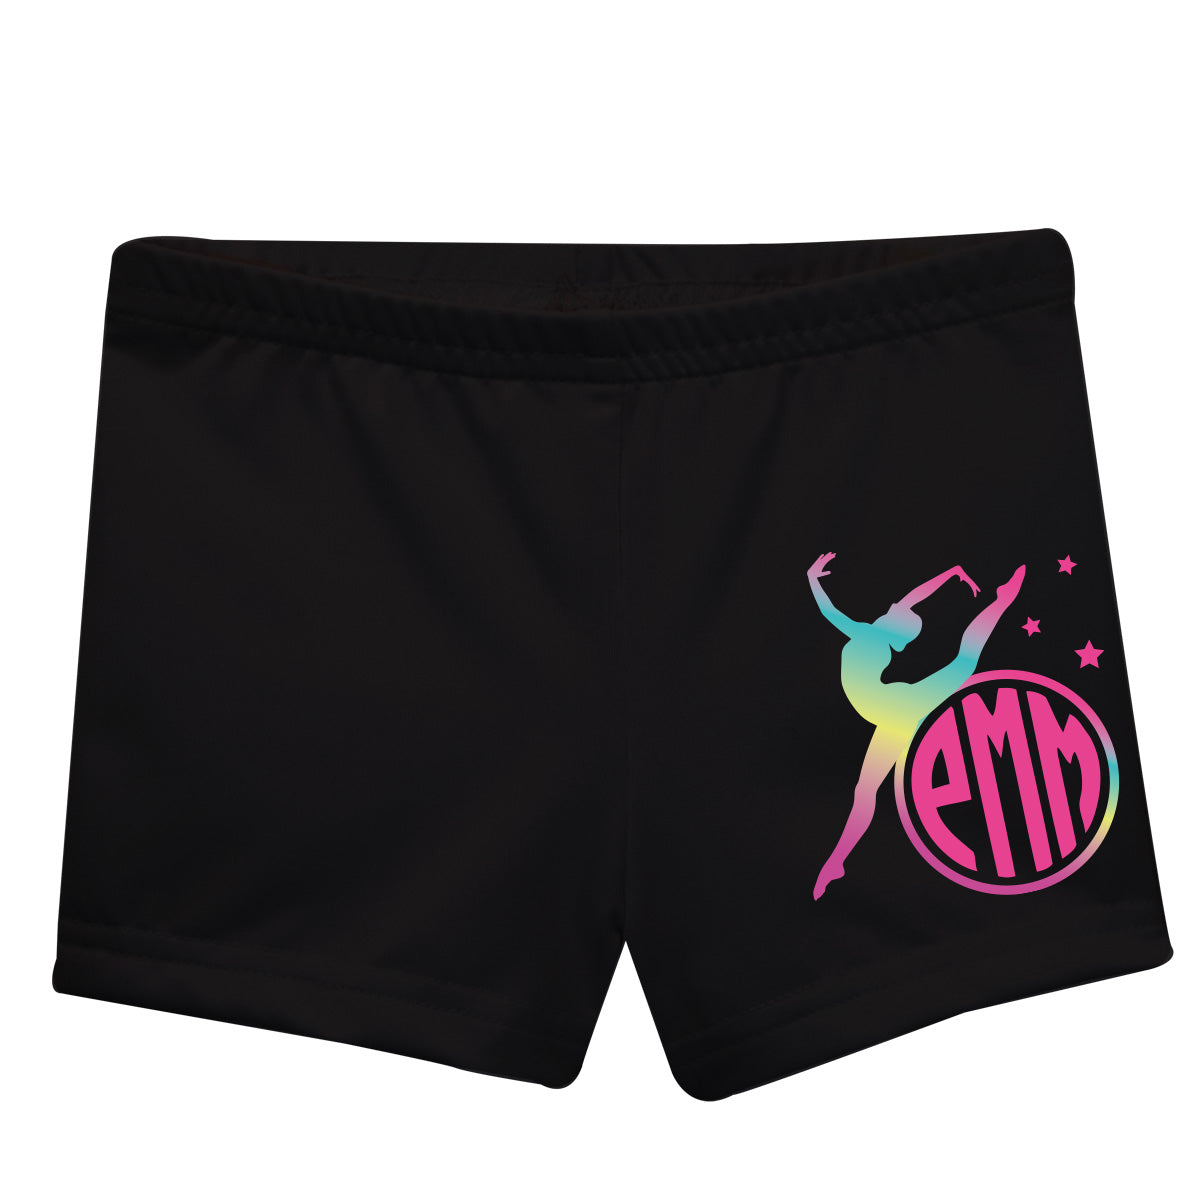 Gymnast Silhouette and Monogram Black Shorties - Wimziy&Co.